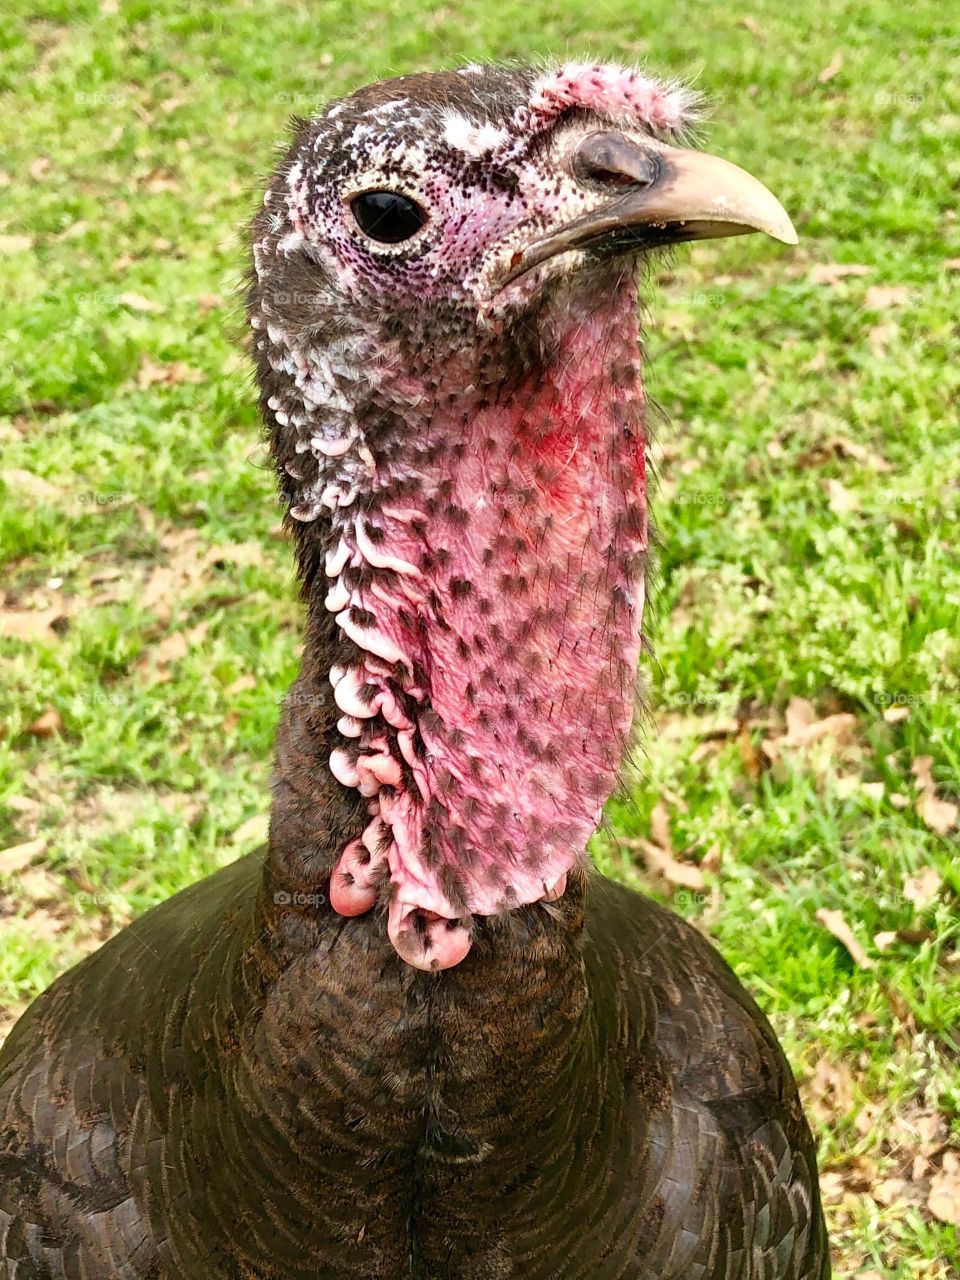 Turkey head and neck showing red